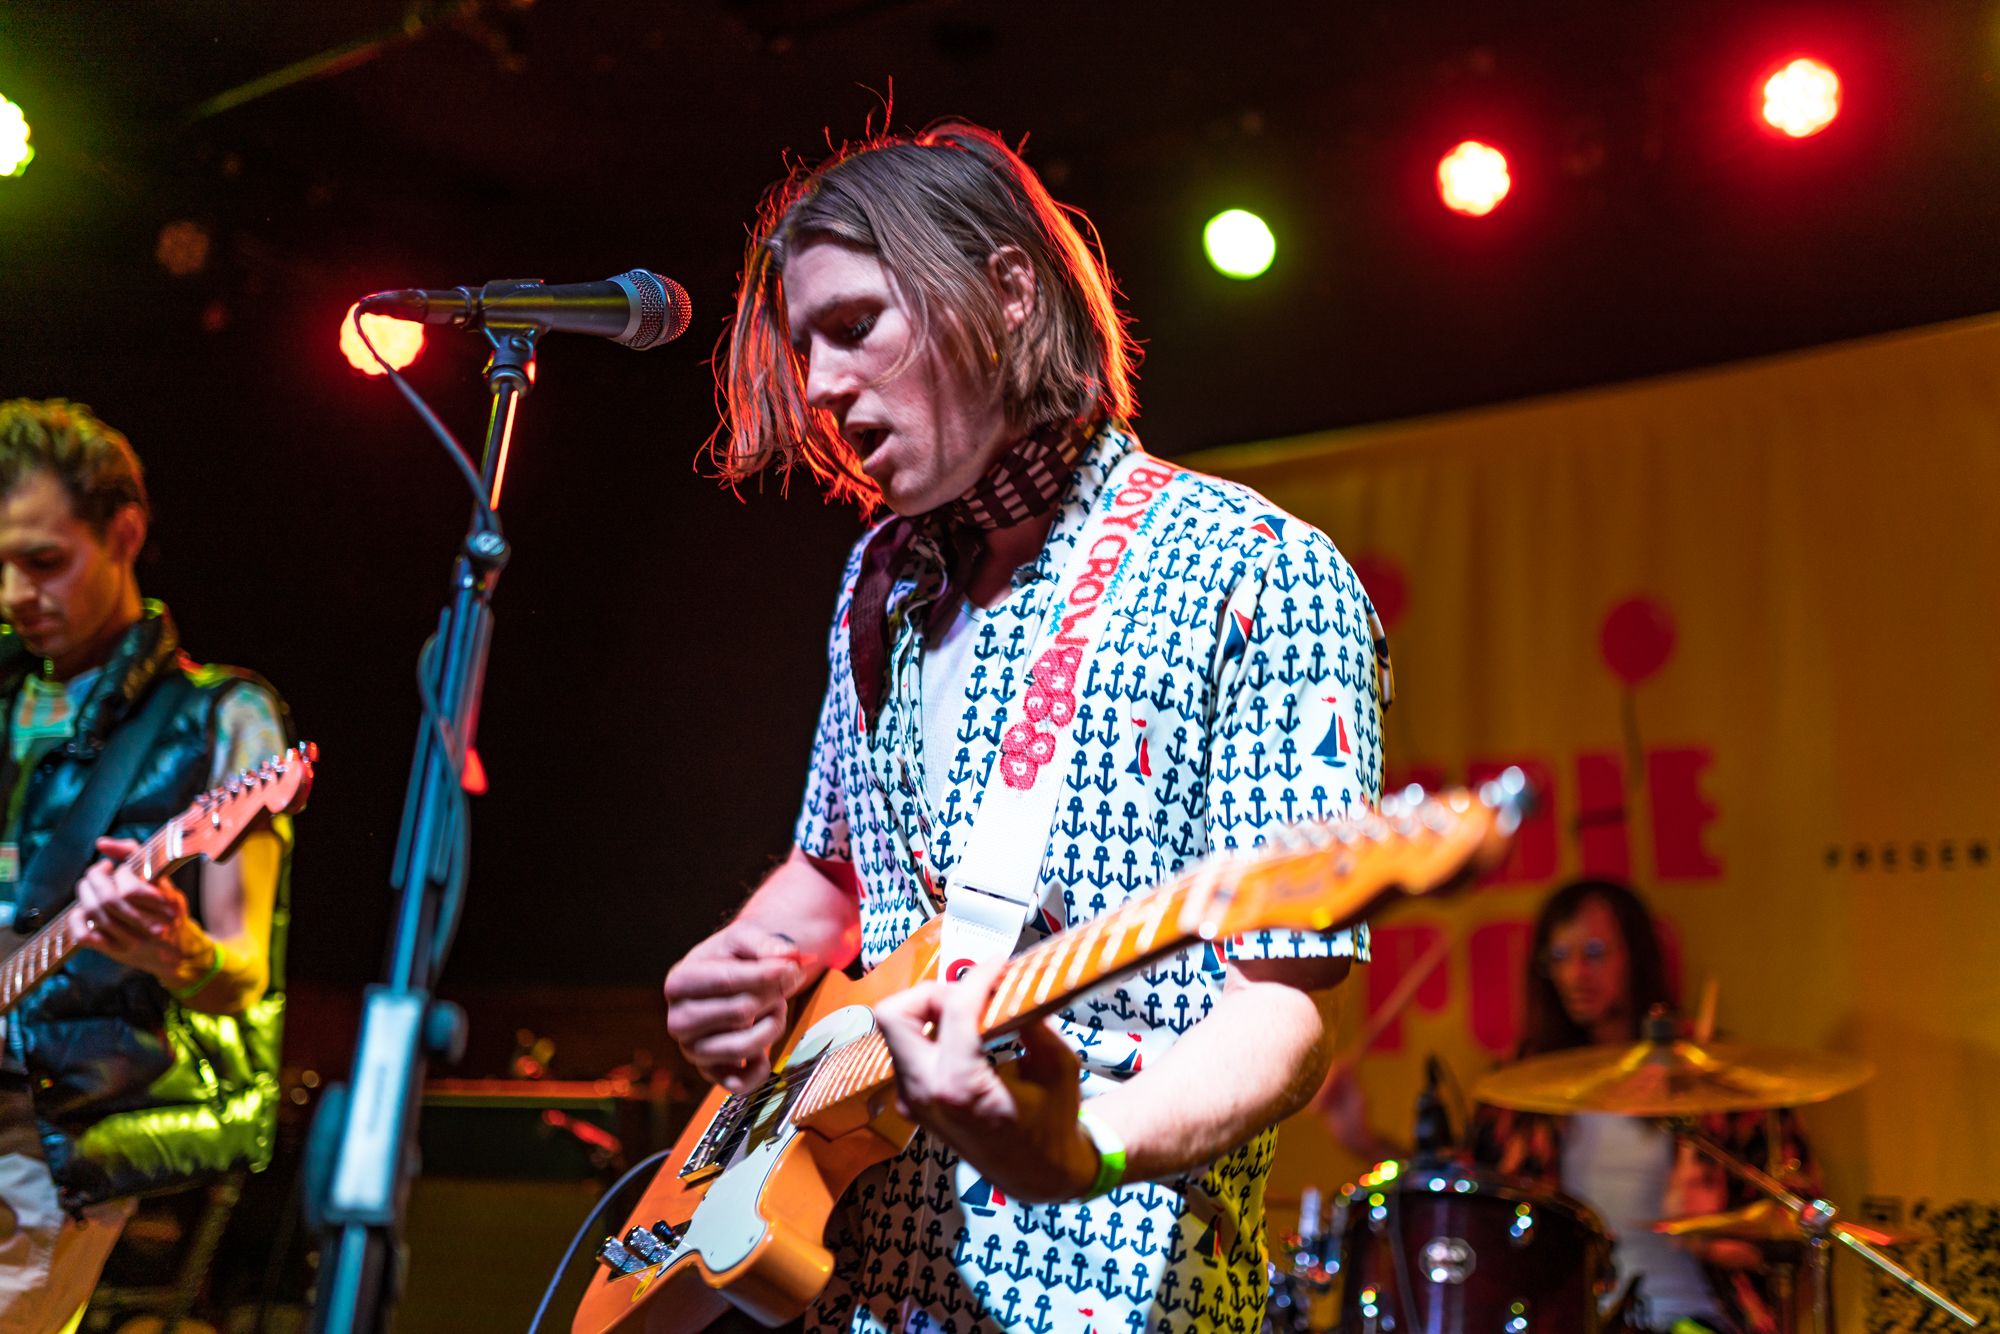 Lostboycrow's Indie Pop Tour Brings A Breath of Youthful Air to Schuba's